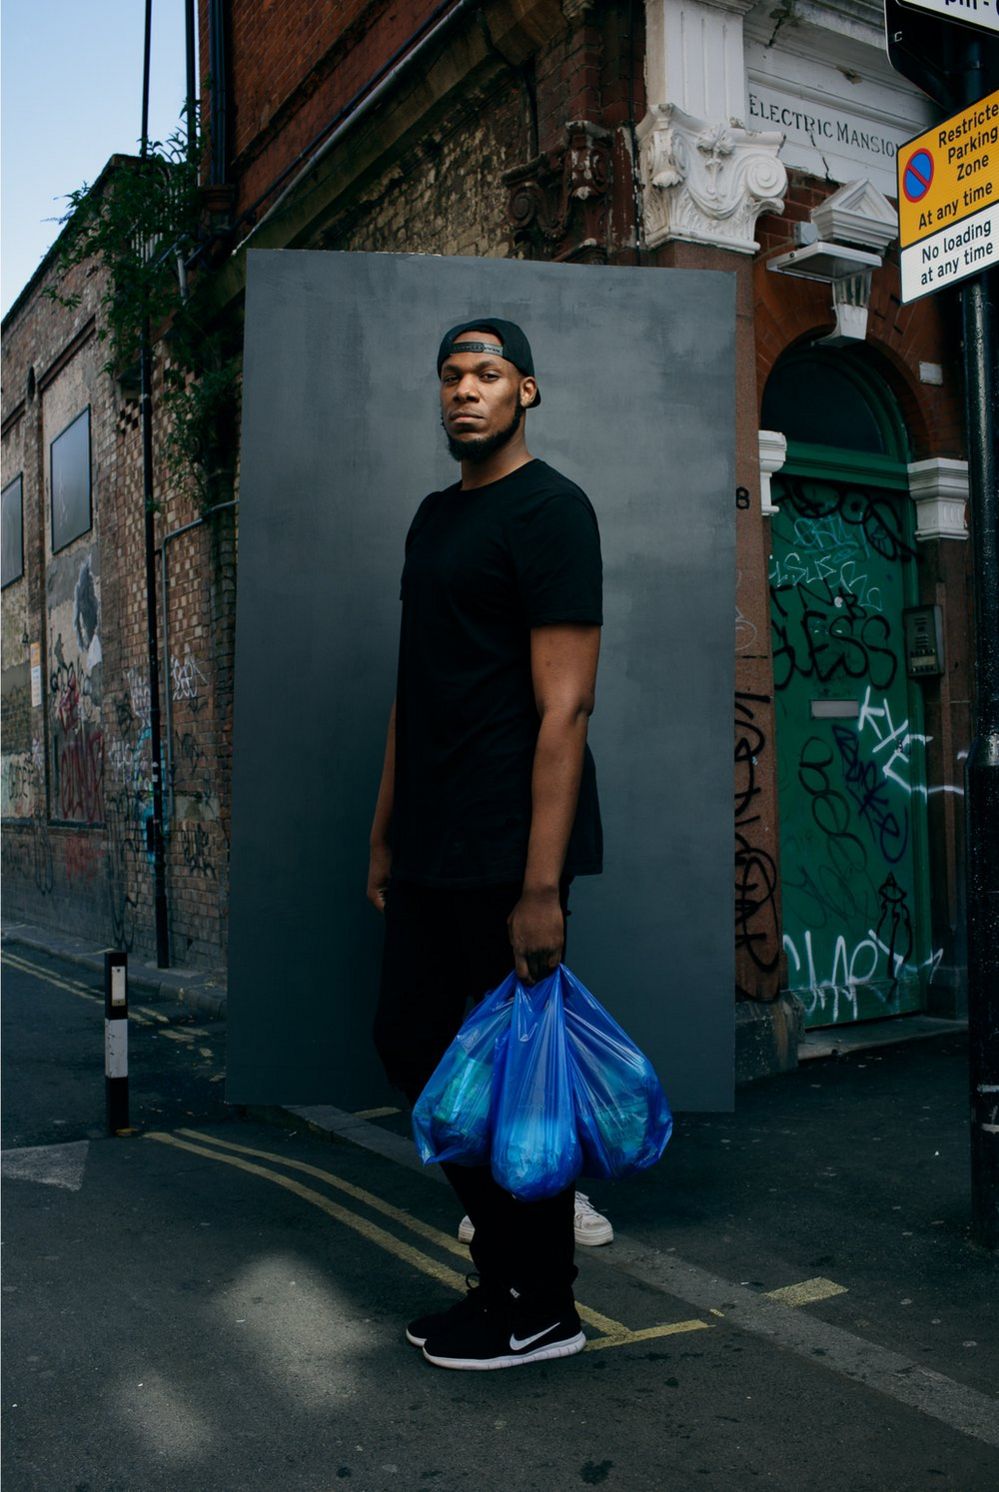 Portrait of a man in the street holding plastic bags